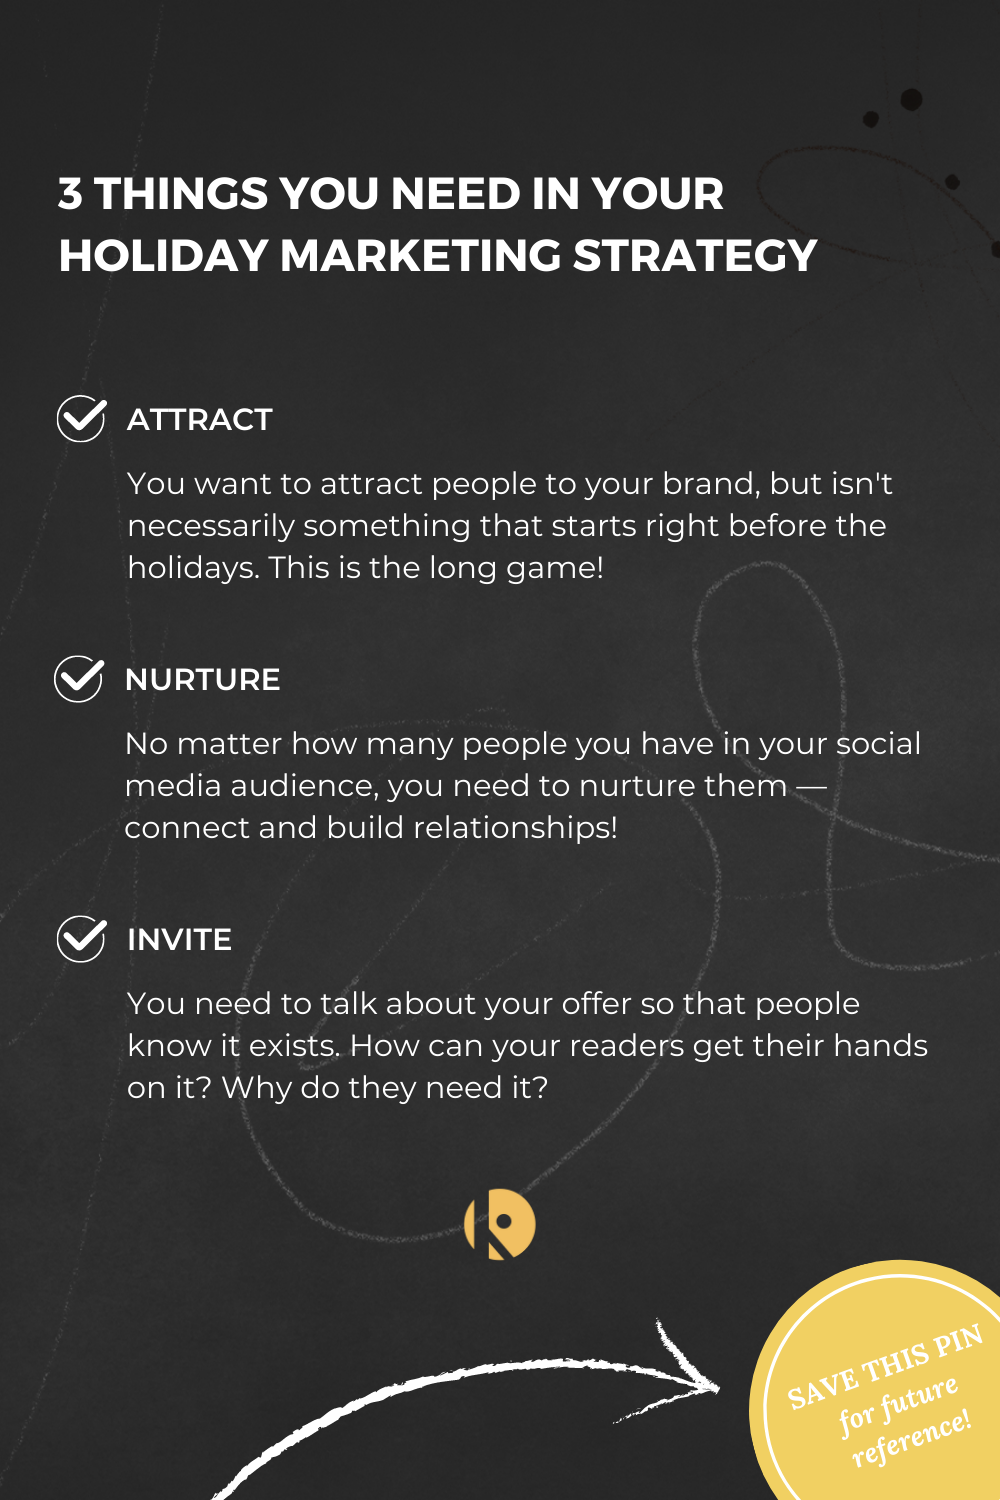 3 Things You Need in Your Holiday Marketing Strategy